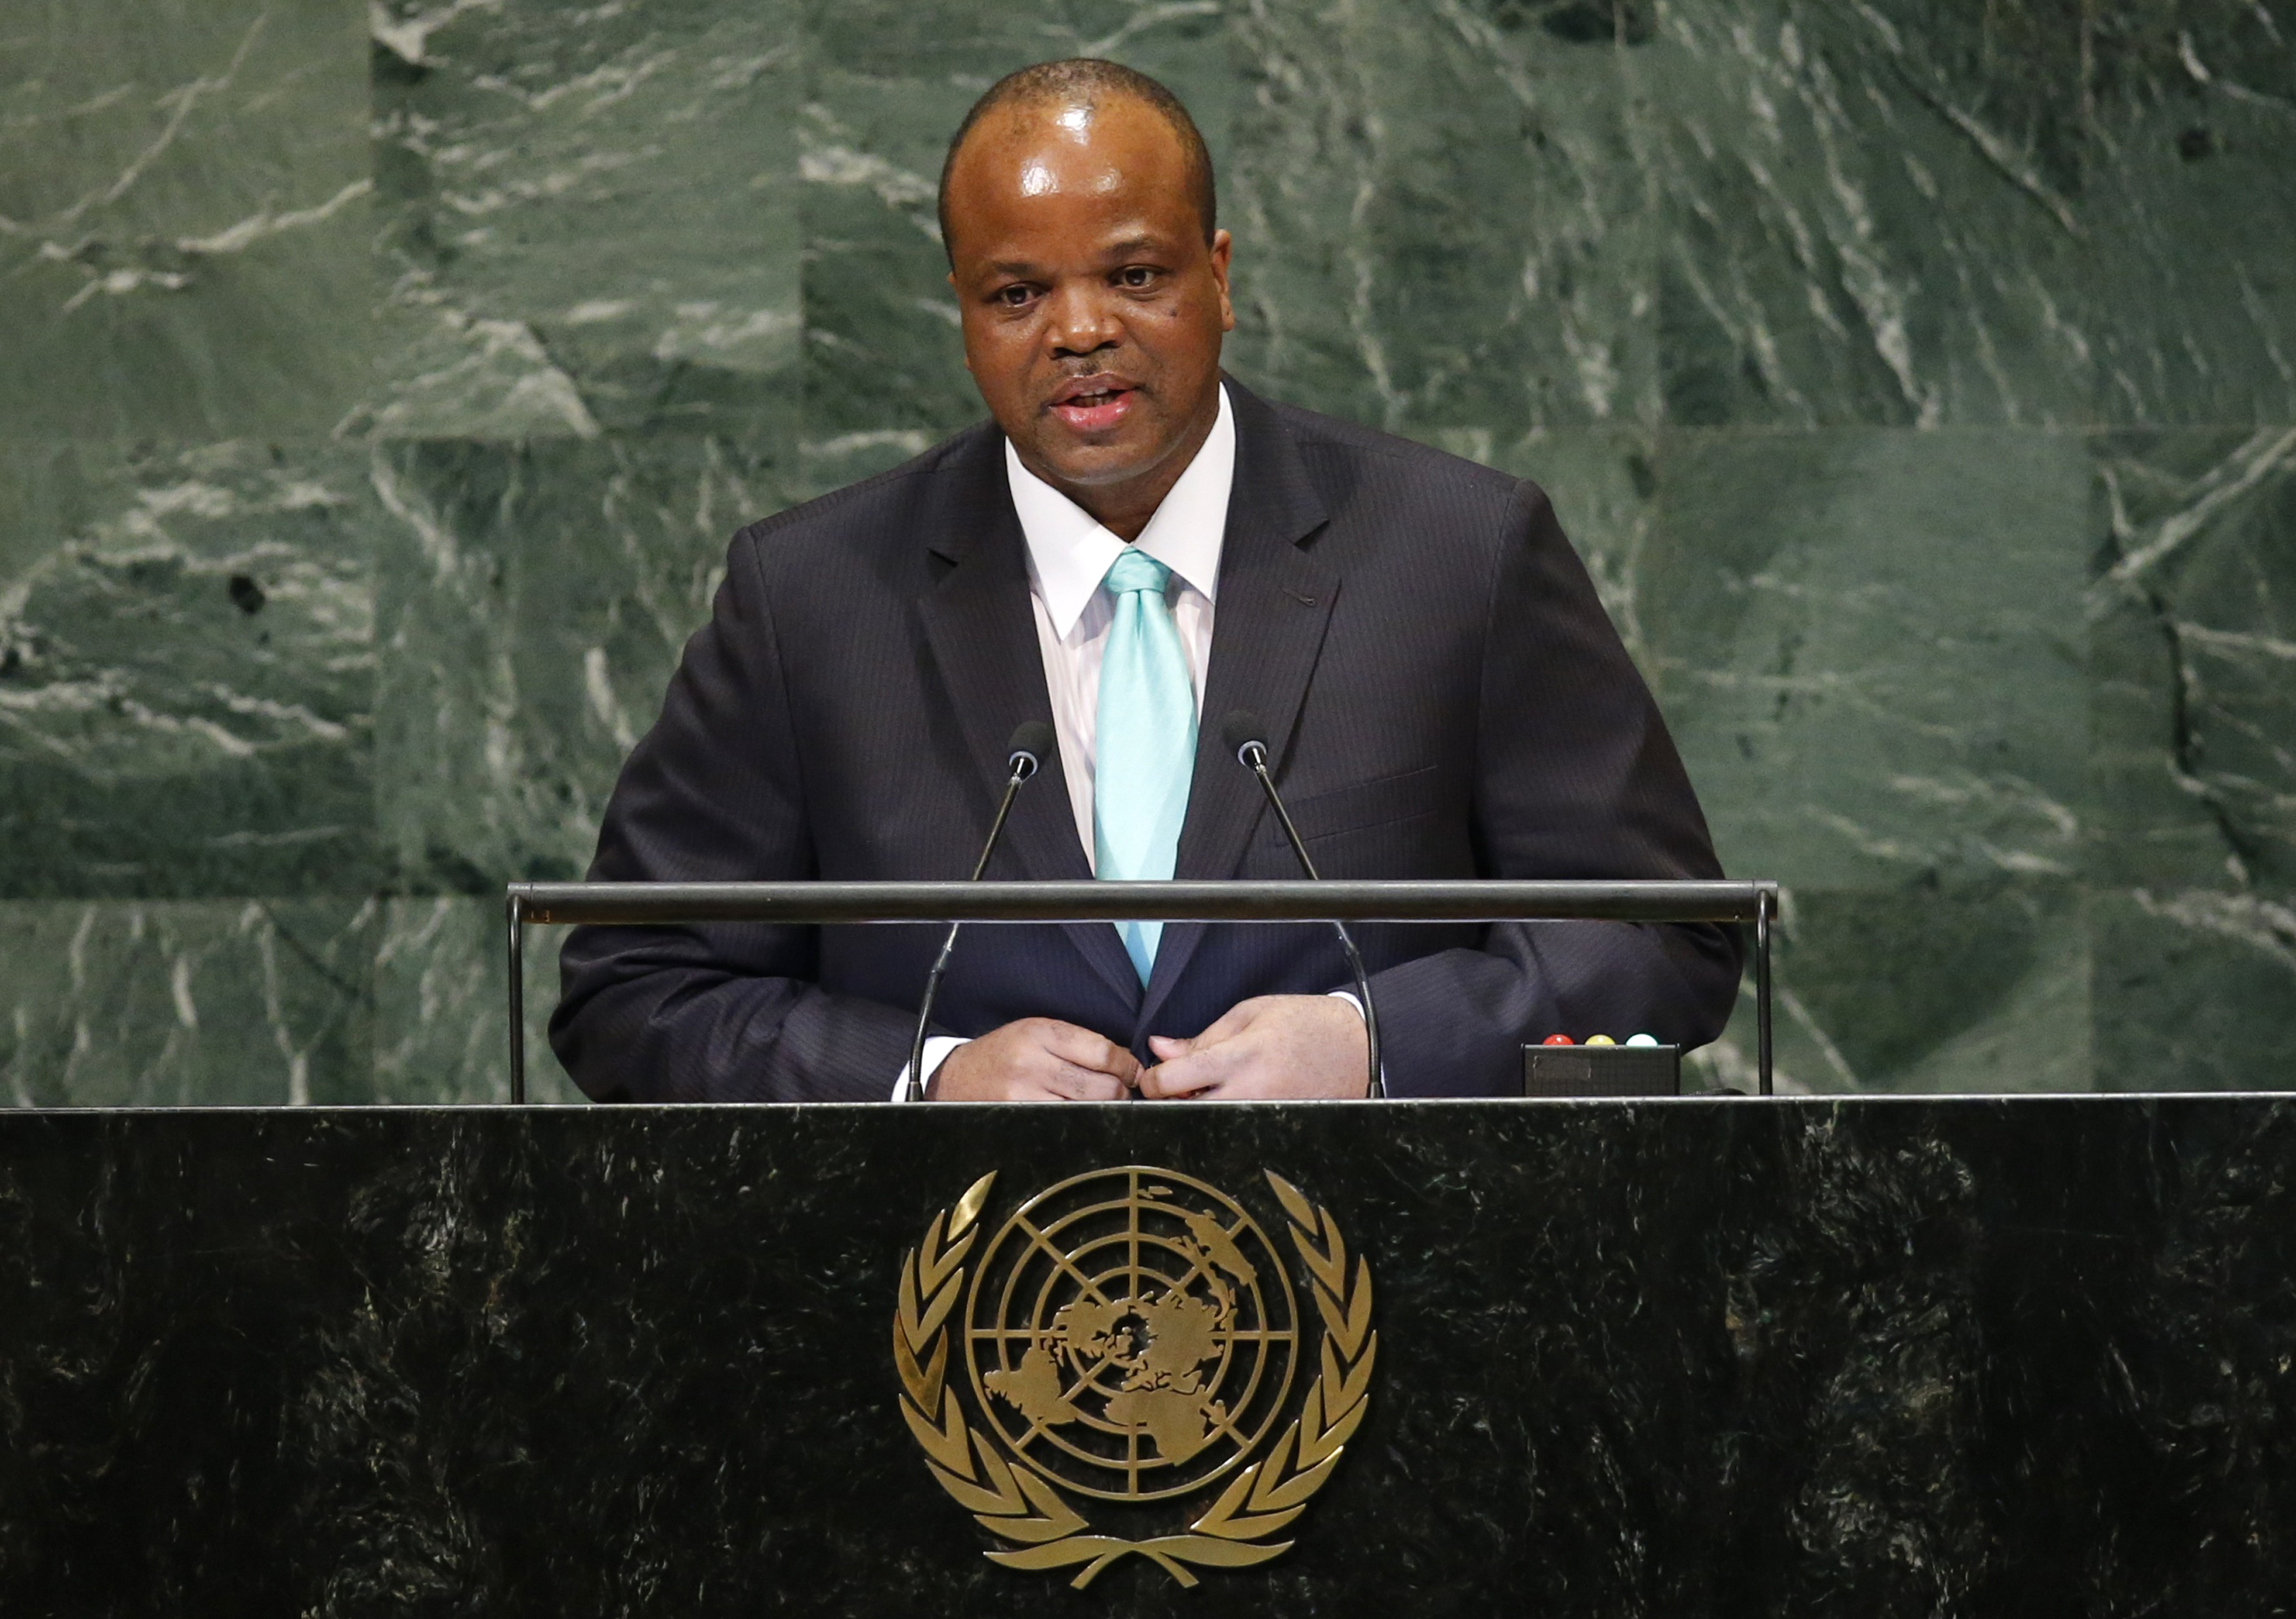 Swaziland's King Mswati III addresses the General Assembly in New York